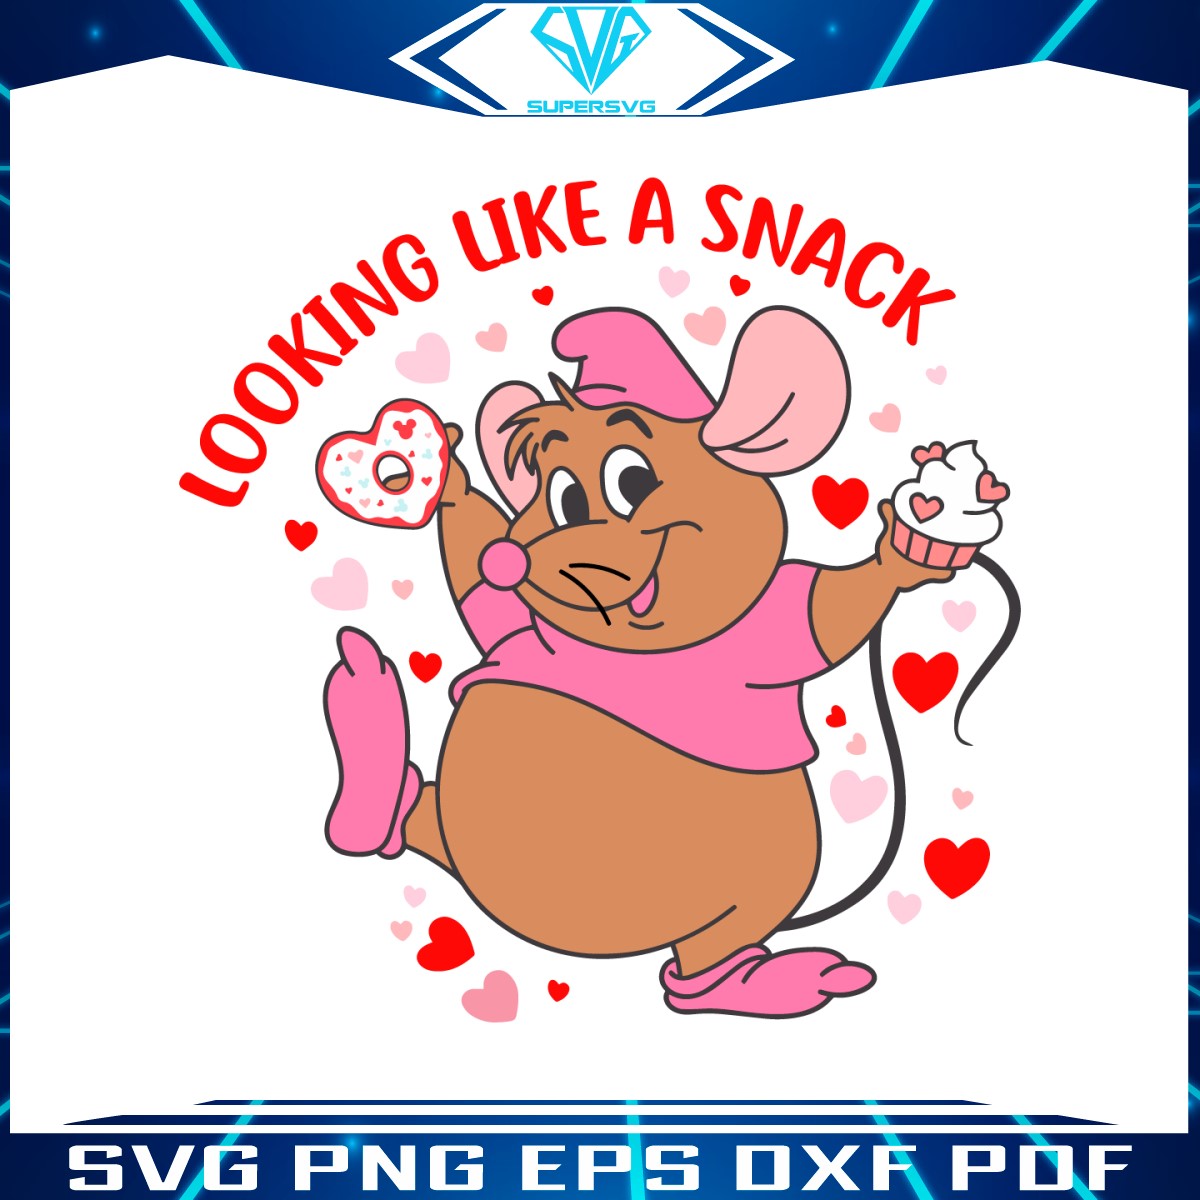 looking-like-a-snack-valentine-svg